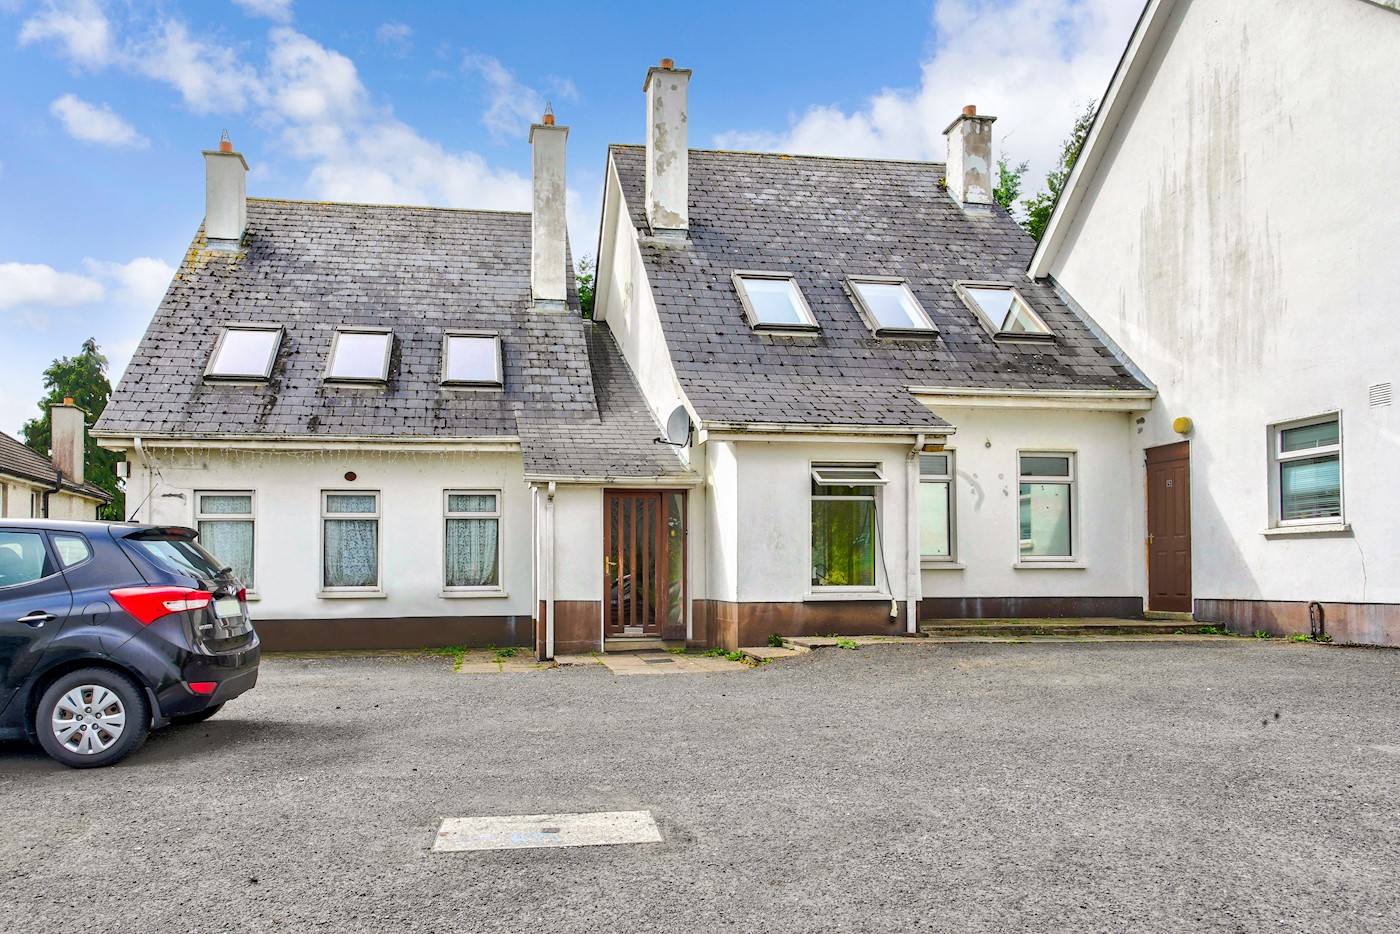 Apartment 4, Brook Court, Ballymore Eustace Road, Naas, Co. Kildare, W91 NH33 1/7